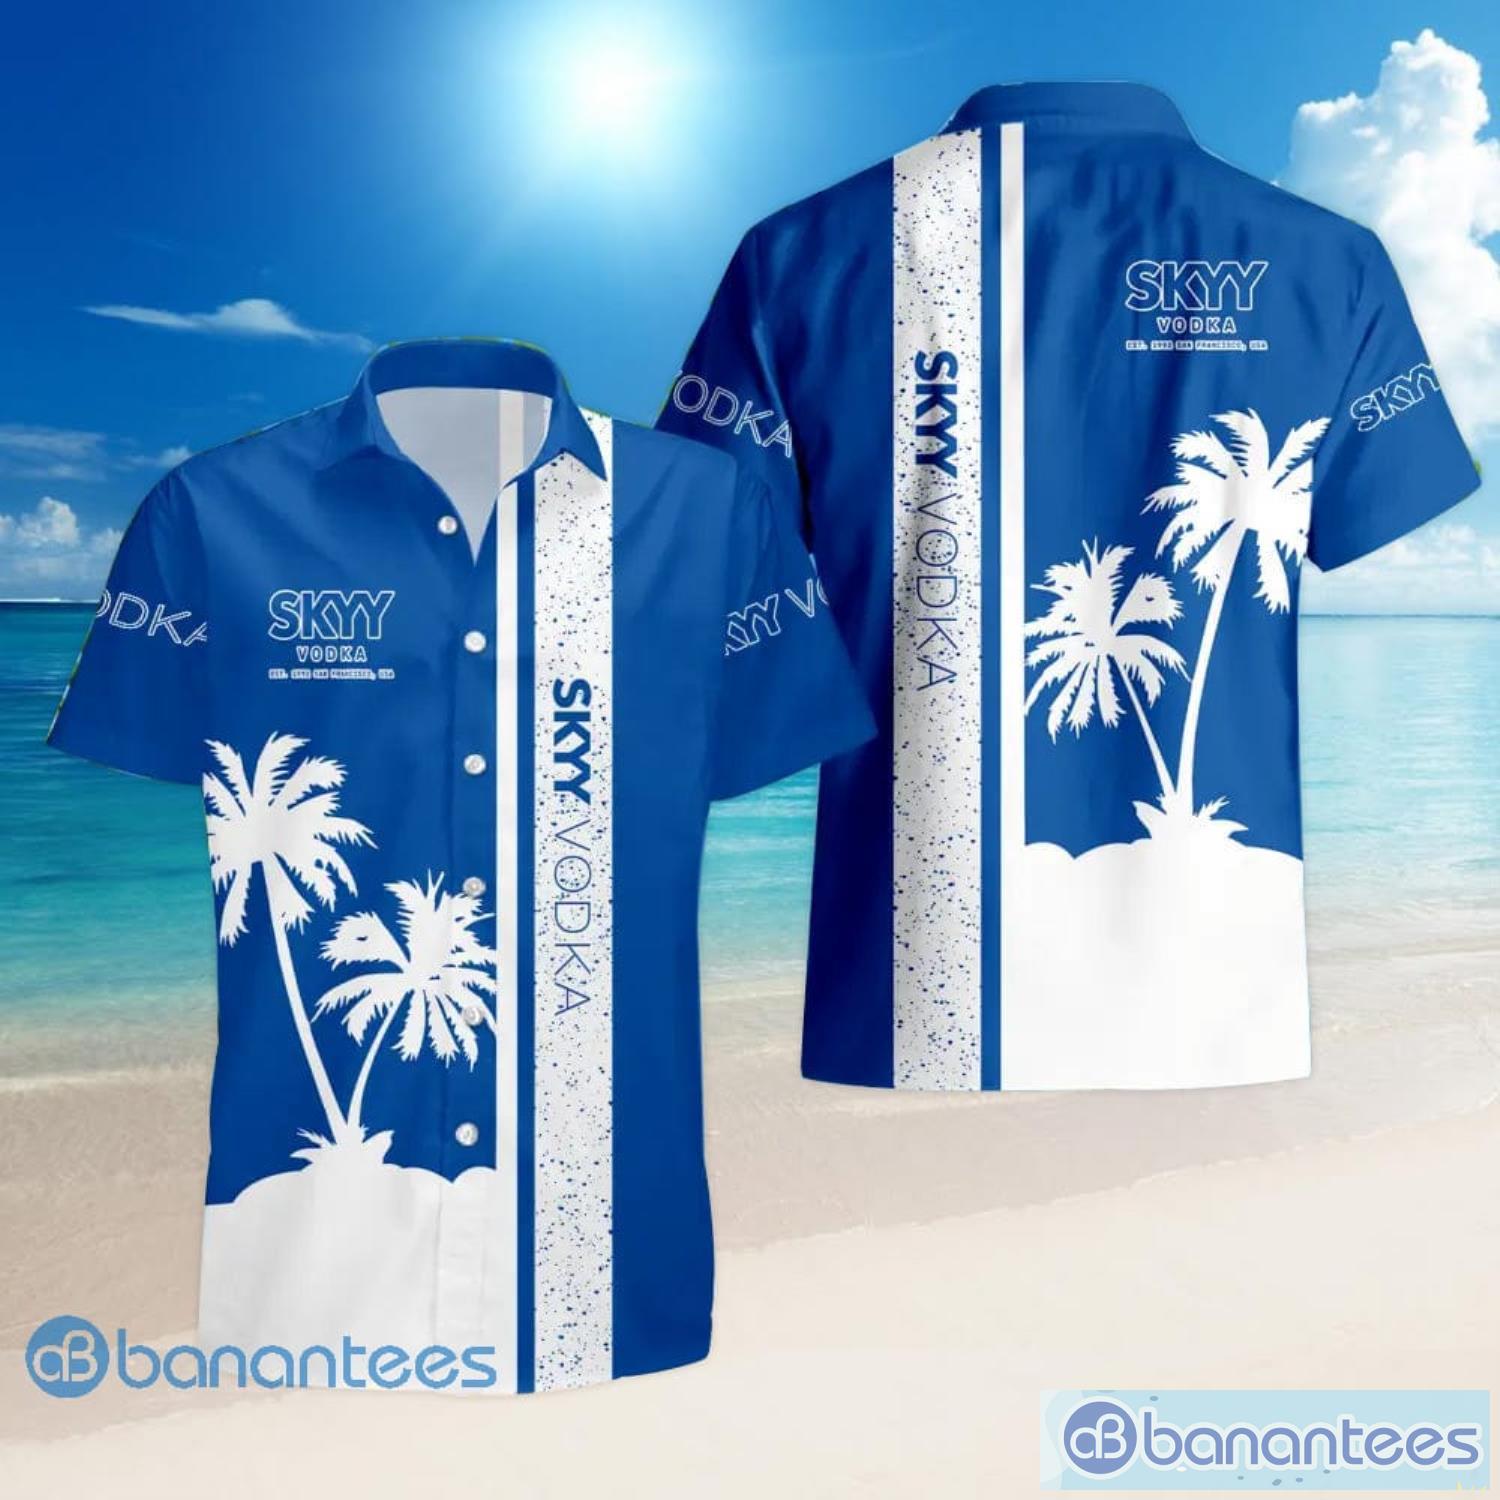 Tennessee Titans NFL And Palm Trees Hawaii Style 3D T-Shirt - Banantees